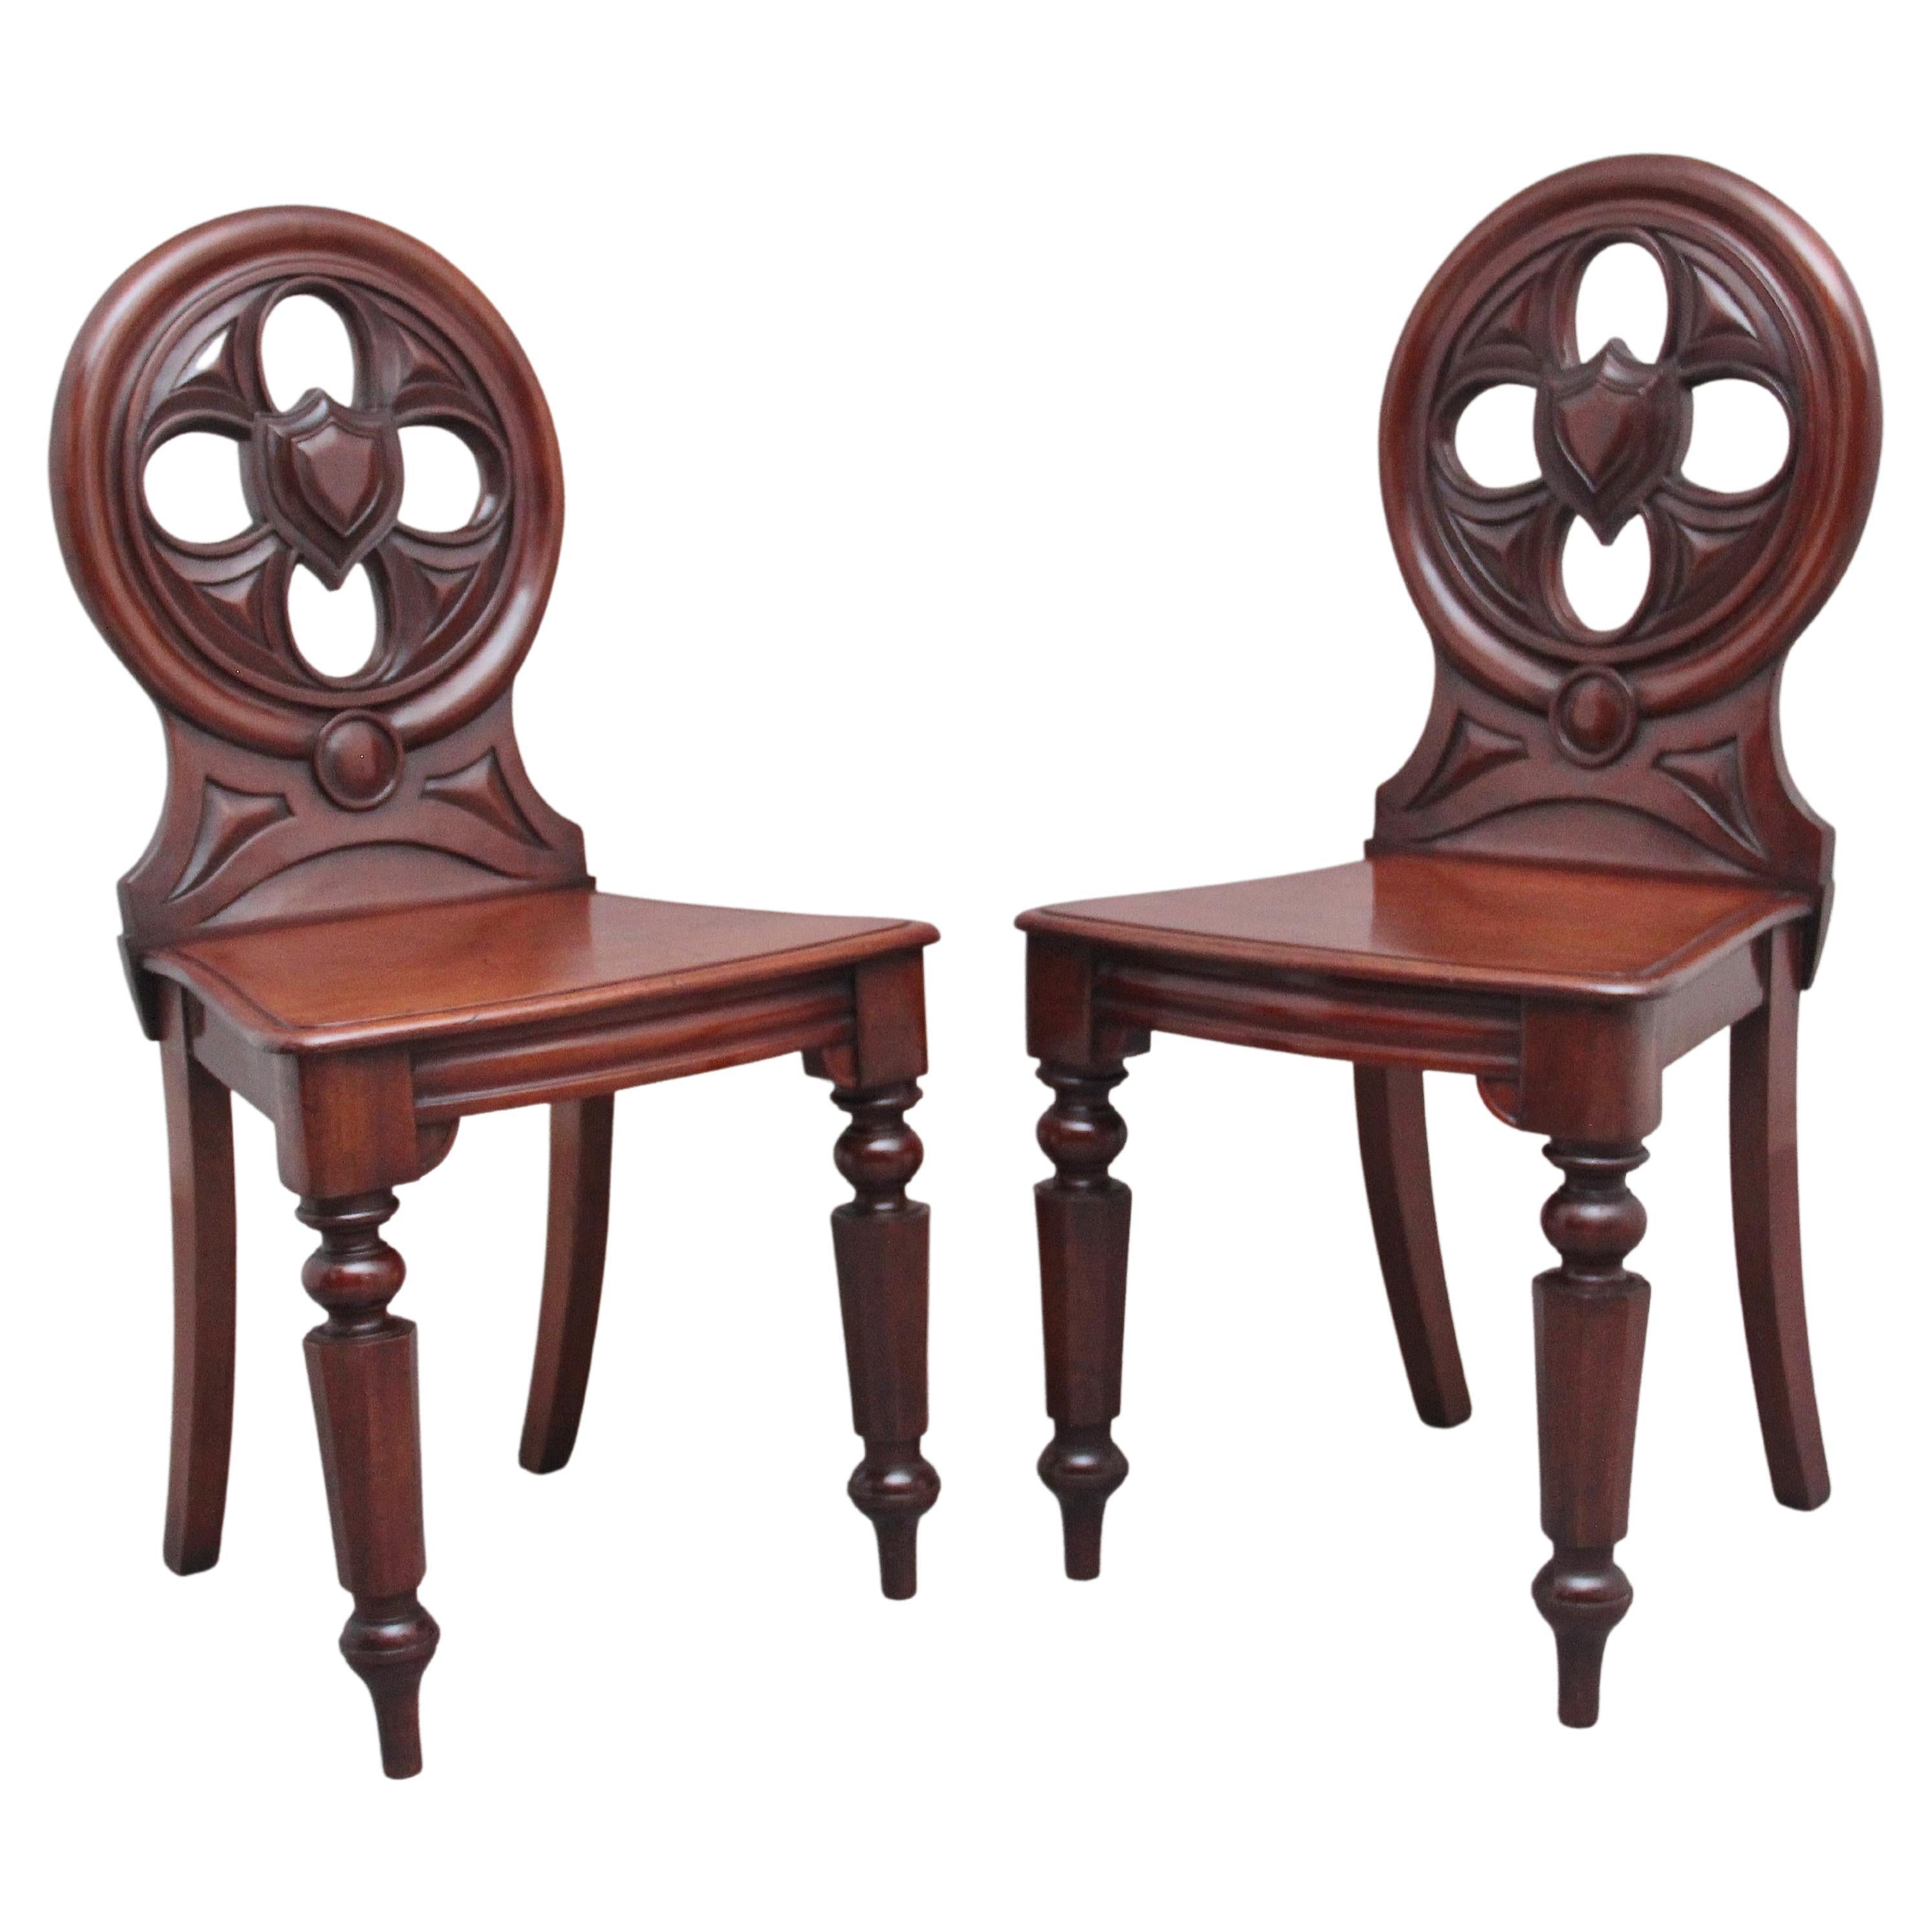 Pair of 19th Century Antique Mahogany Hall Chairs